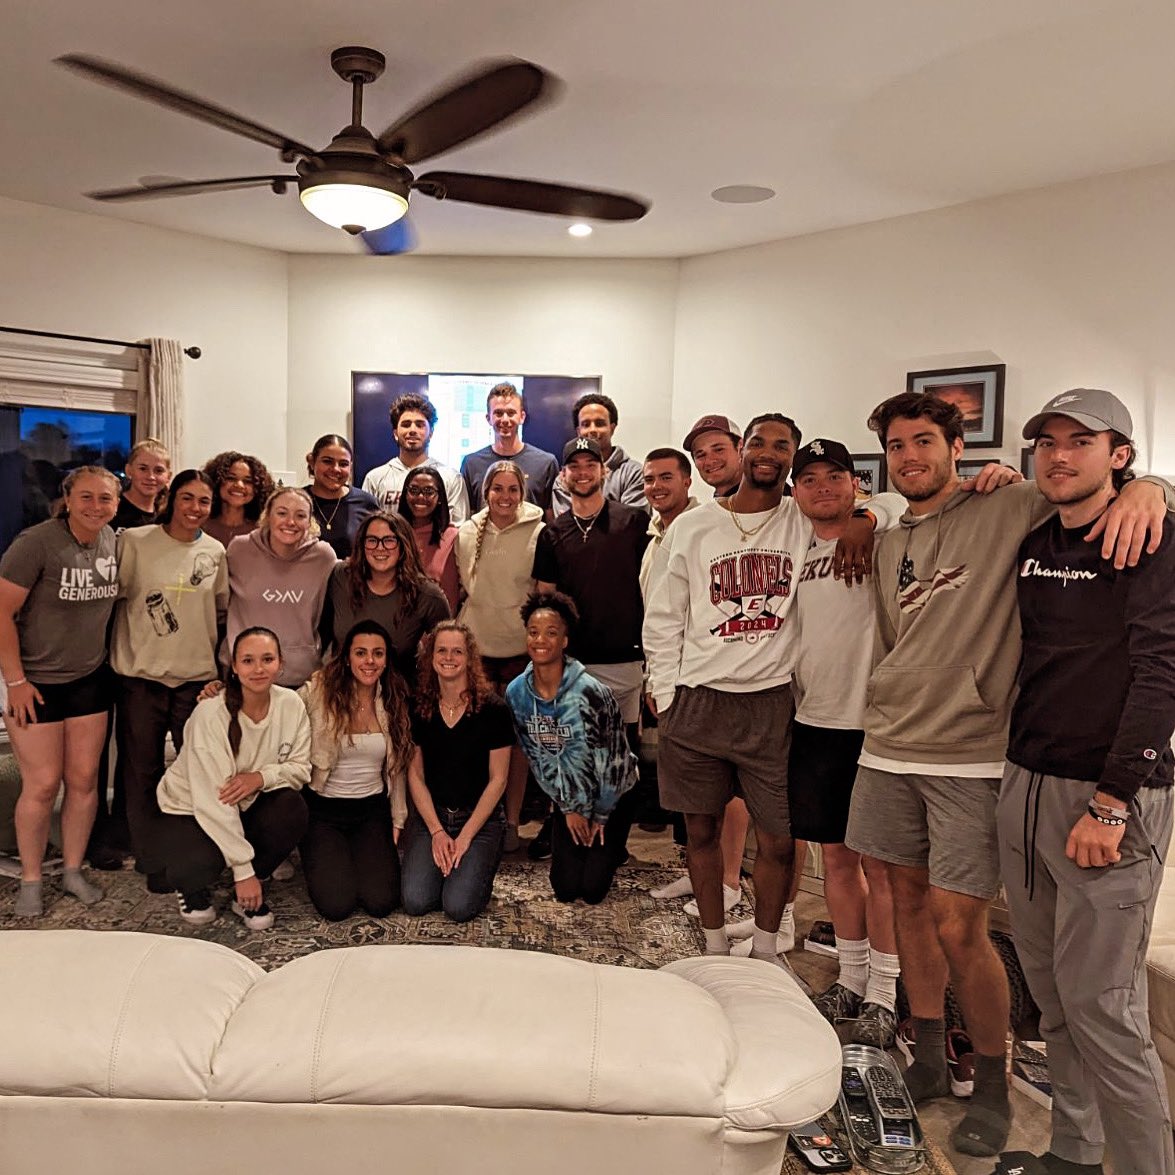 So awesome to see how God is working in our #CoedBibleStudy! Thank you to the Walters for opening their home and pouring into these athletes each week! #GoBigE #ekufca #fcahuddle #fca247 @thefcateam